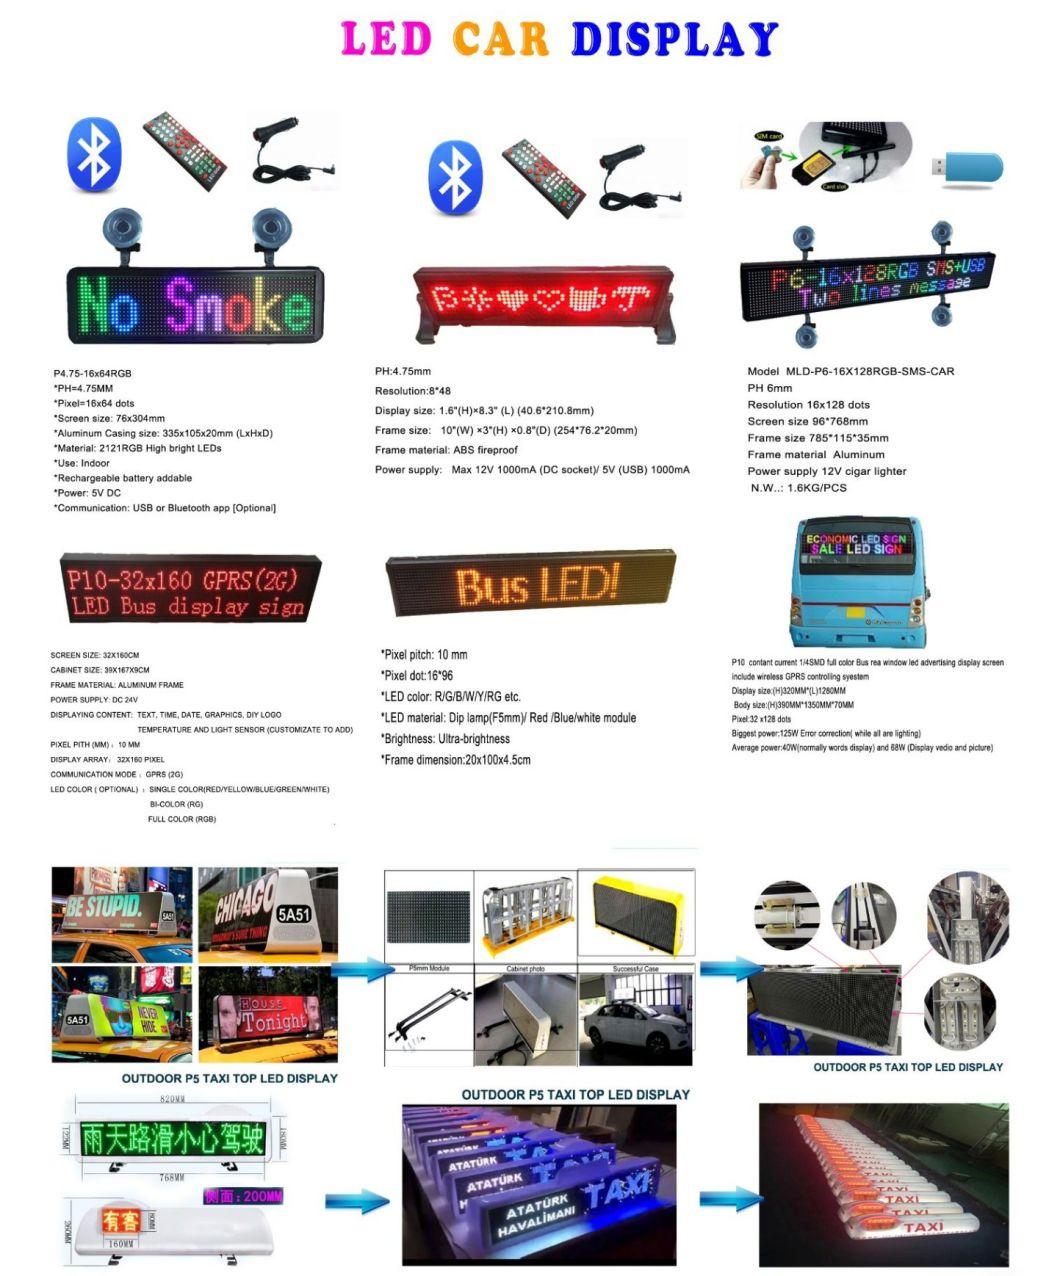 Export Aluminum LED Screen to Make Indoor and Outdoor Advertising Signs Wall Display Screen